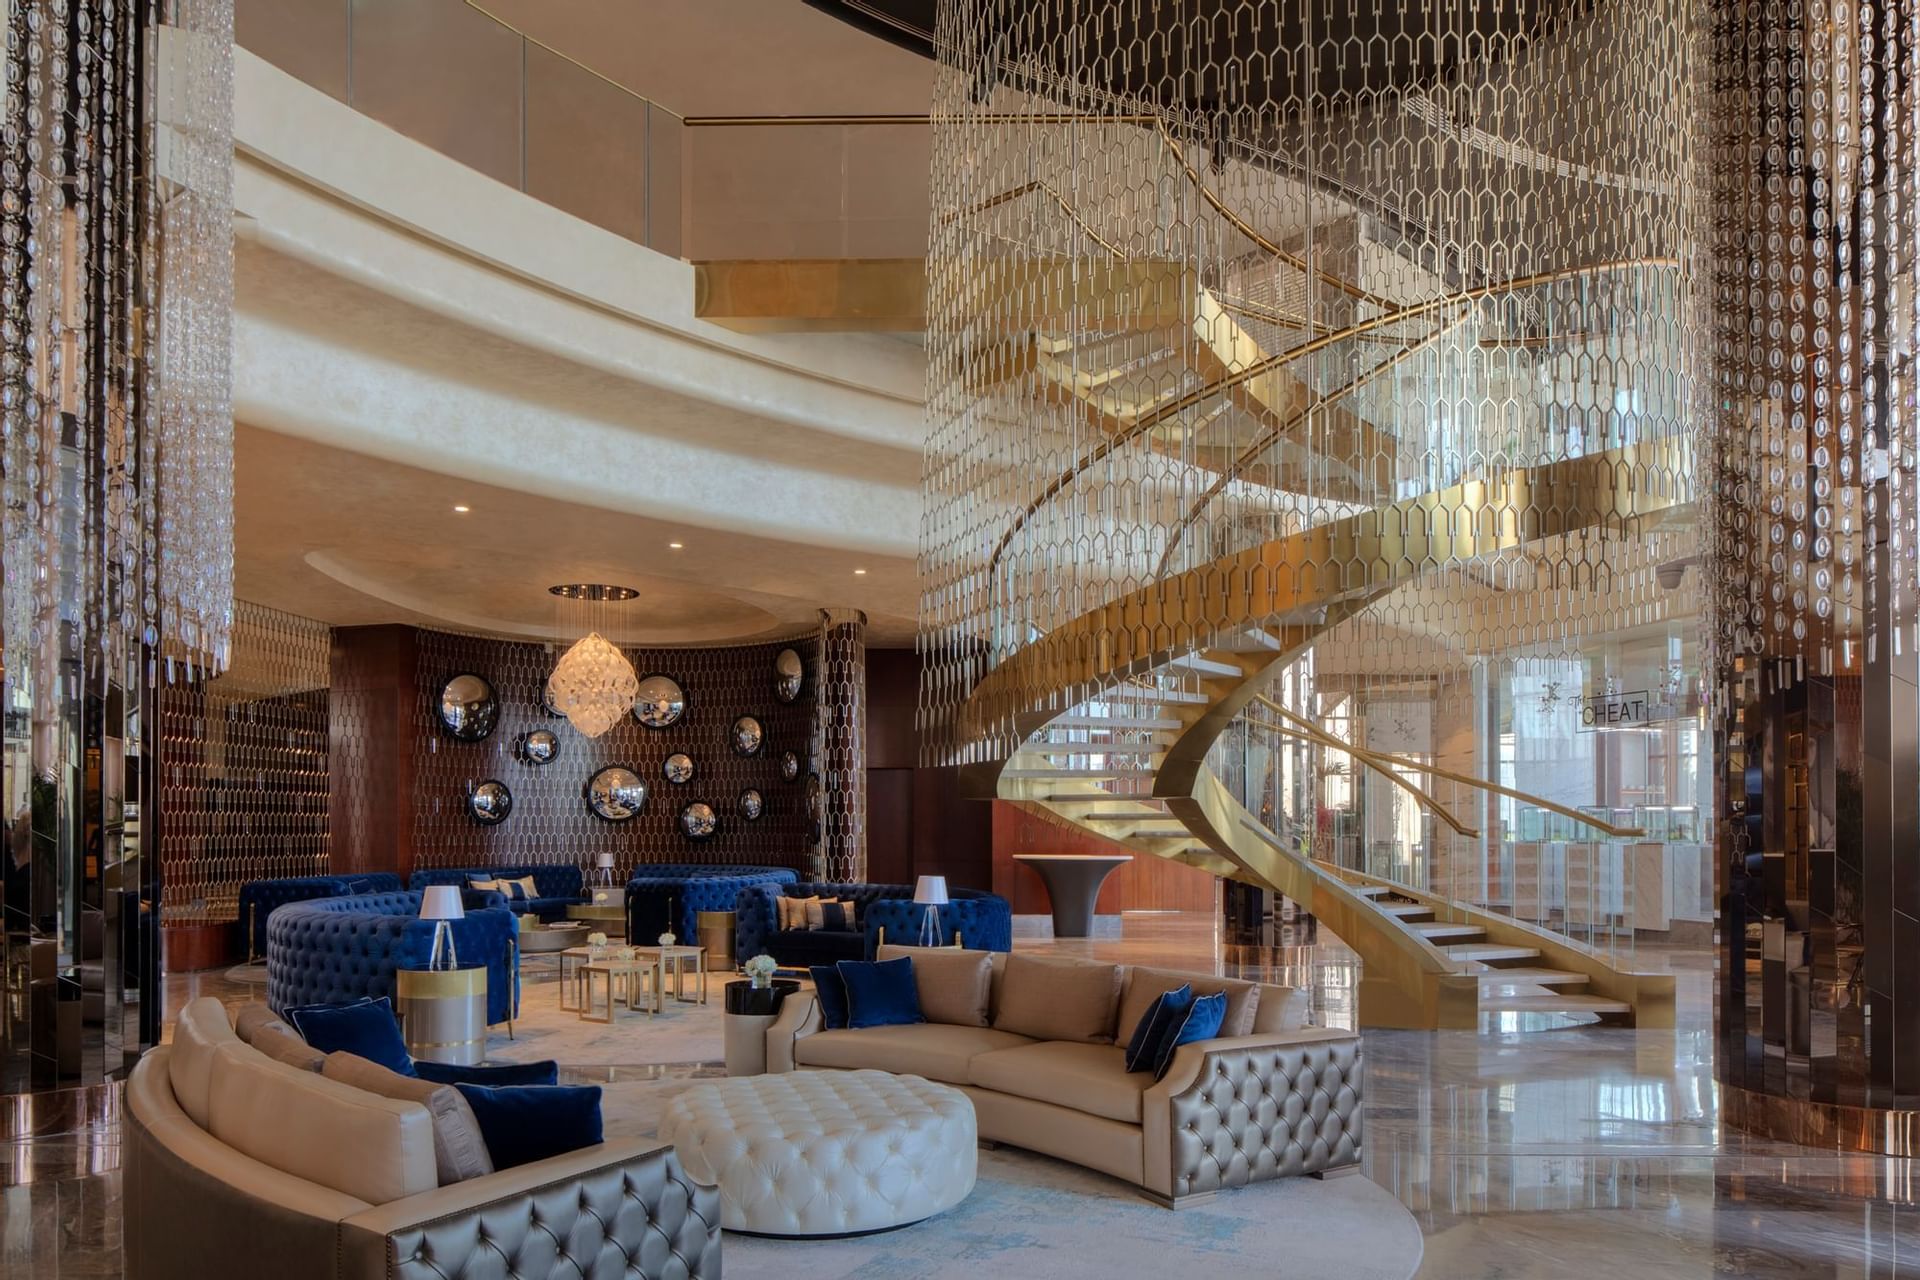 Luxury lobby lounge area with a spiral stairway at Paramount Hotel Dubai